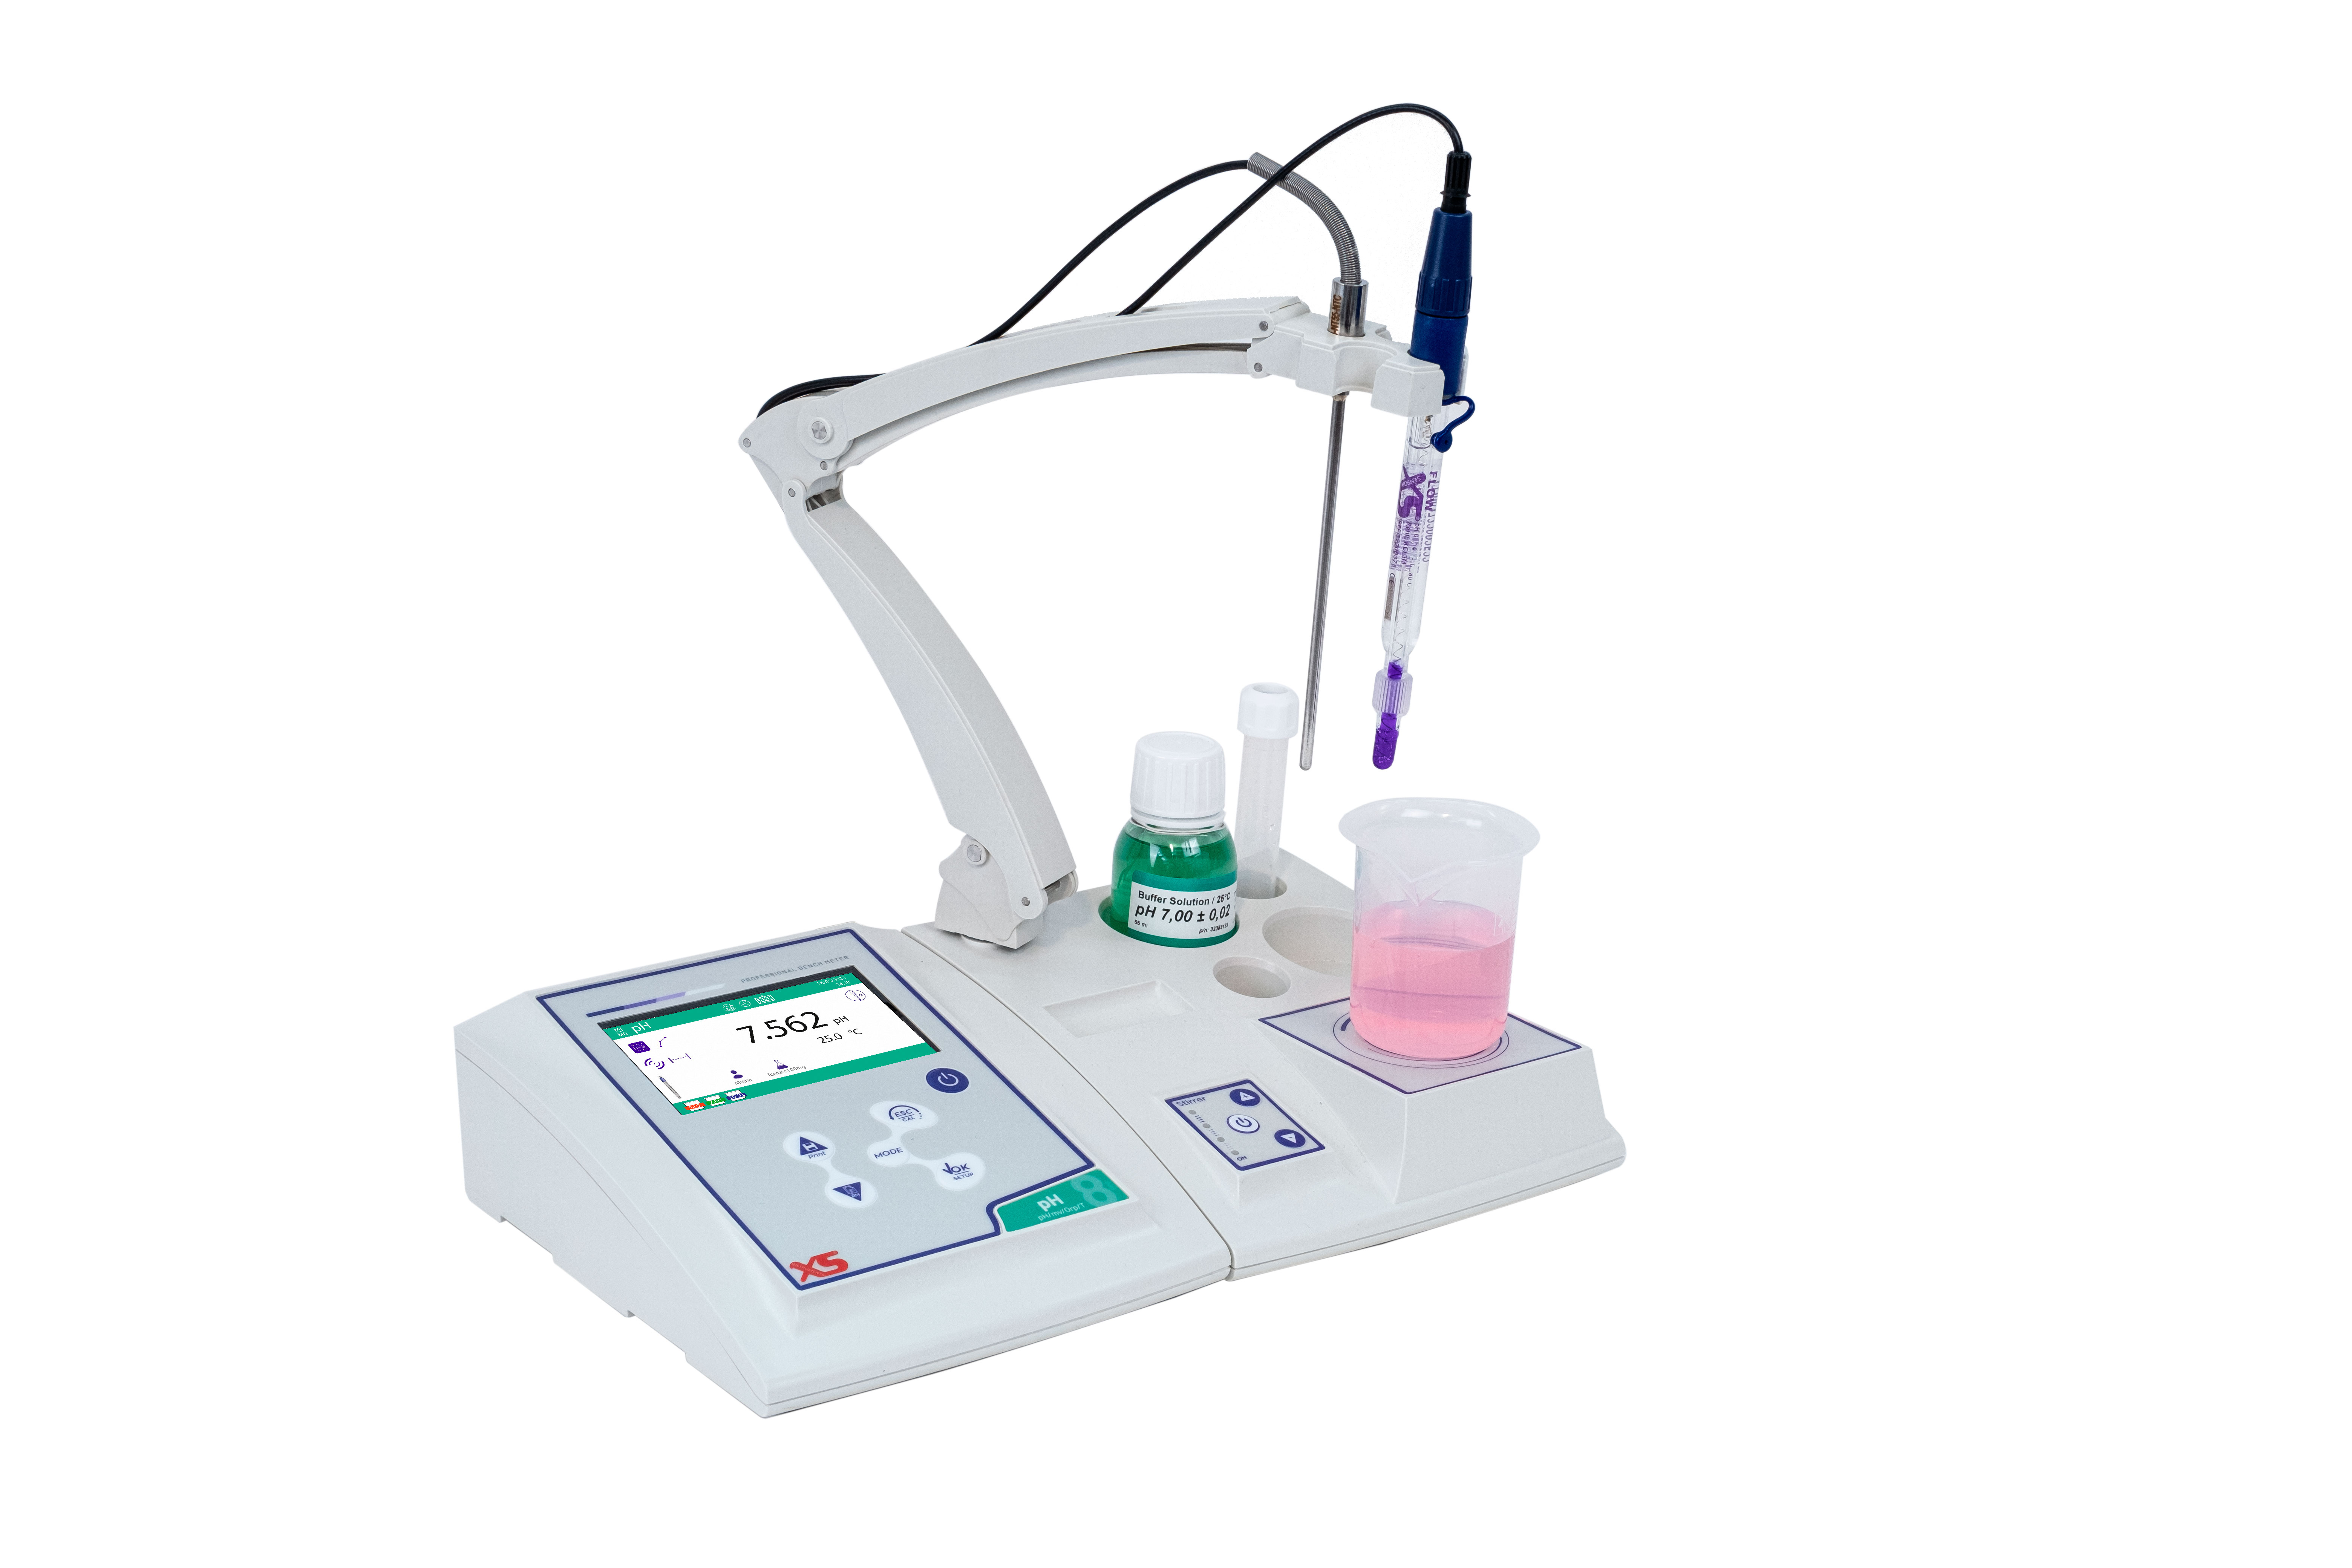 Benchtop pHmeters PH 8 PRO. XS. Magnetic stirrer with arm. Electrode: XS Polymer. Cable BNC. Tempreature sensor. Buffer solutions pH 7 and pH 4. Datalogger and Datalink software.  Measurement range: pH -2.00 to 16.00; Temp. -10 to 120.0 ºCmV ± 2000 mV.